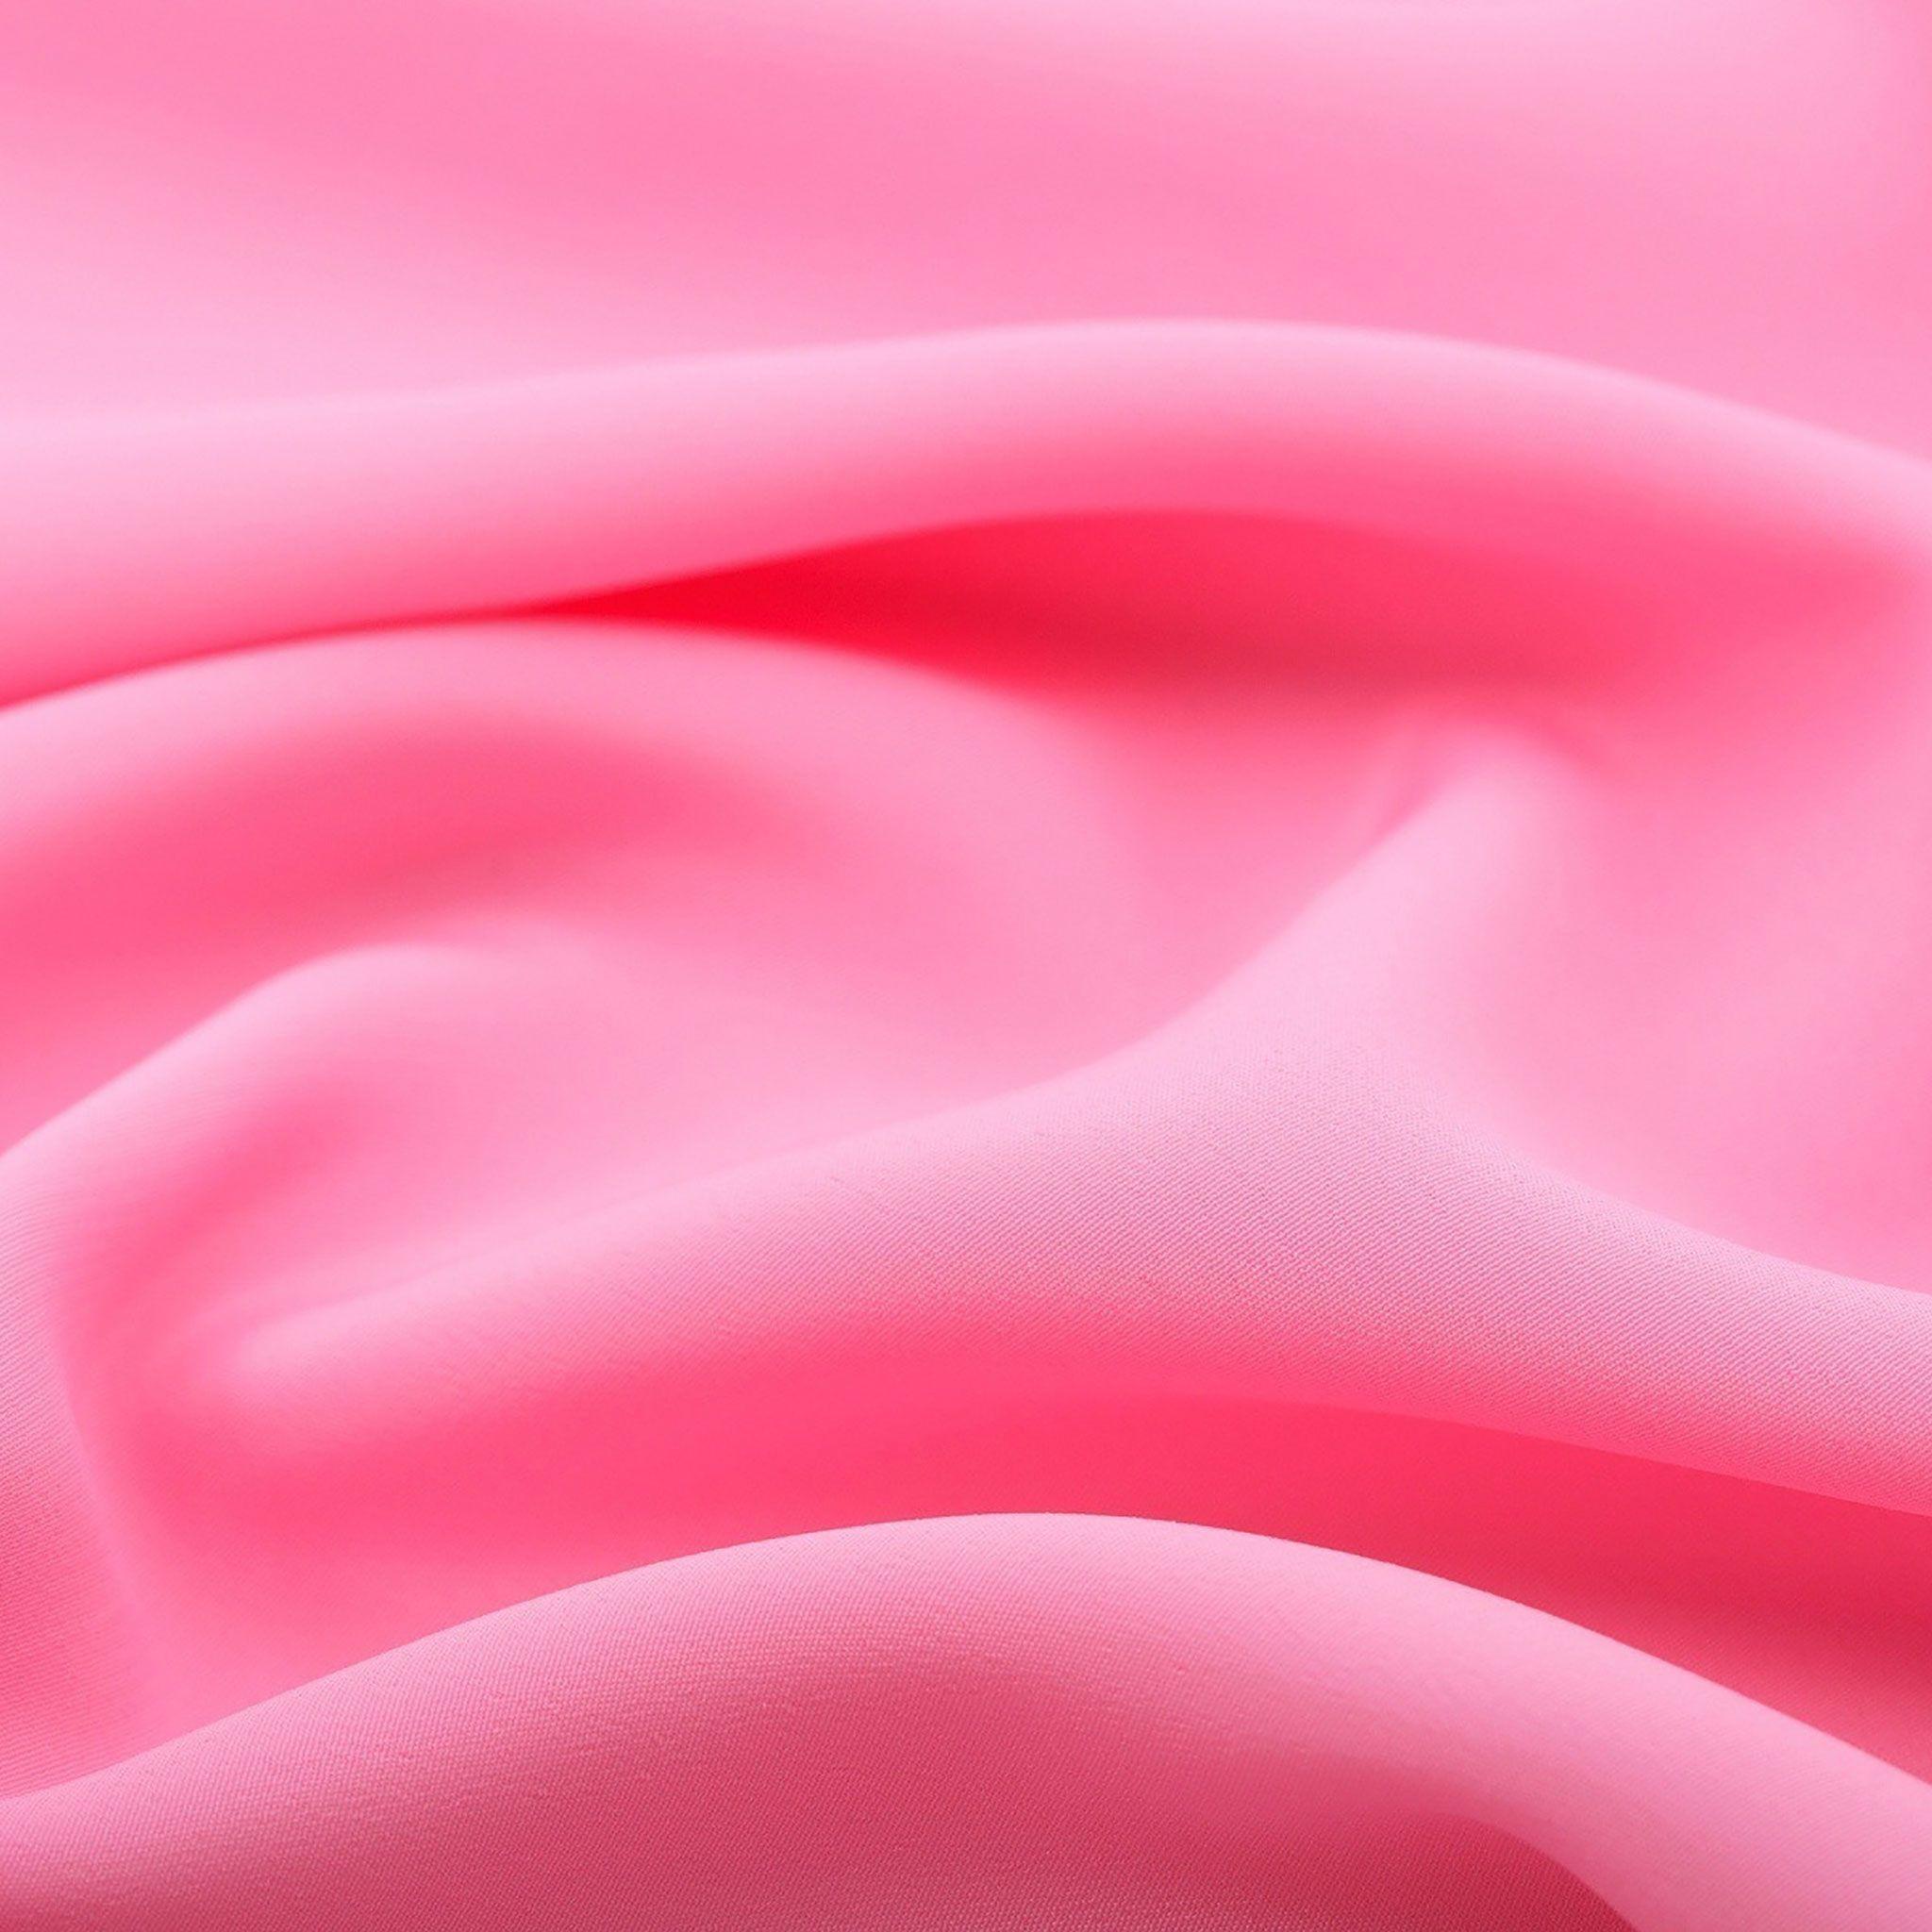 Download wallpaper 3415x3415 stripes blur abstraction pink pastel ipad  pro 129 retina for parallax hd background